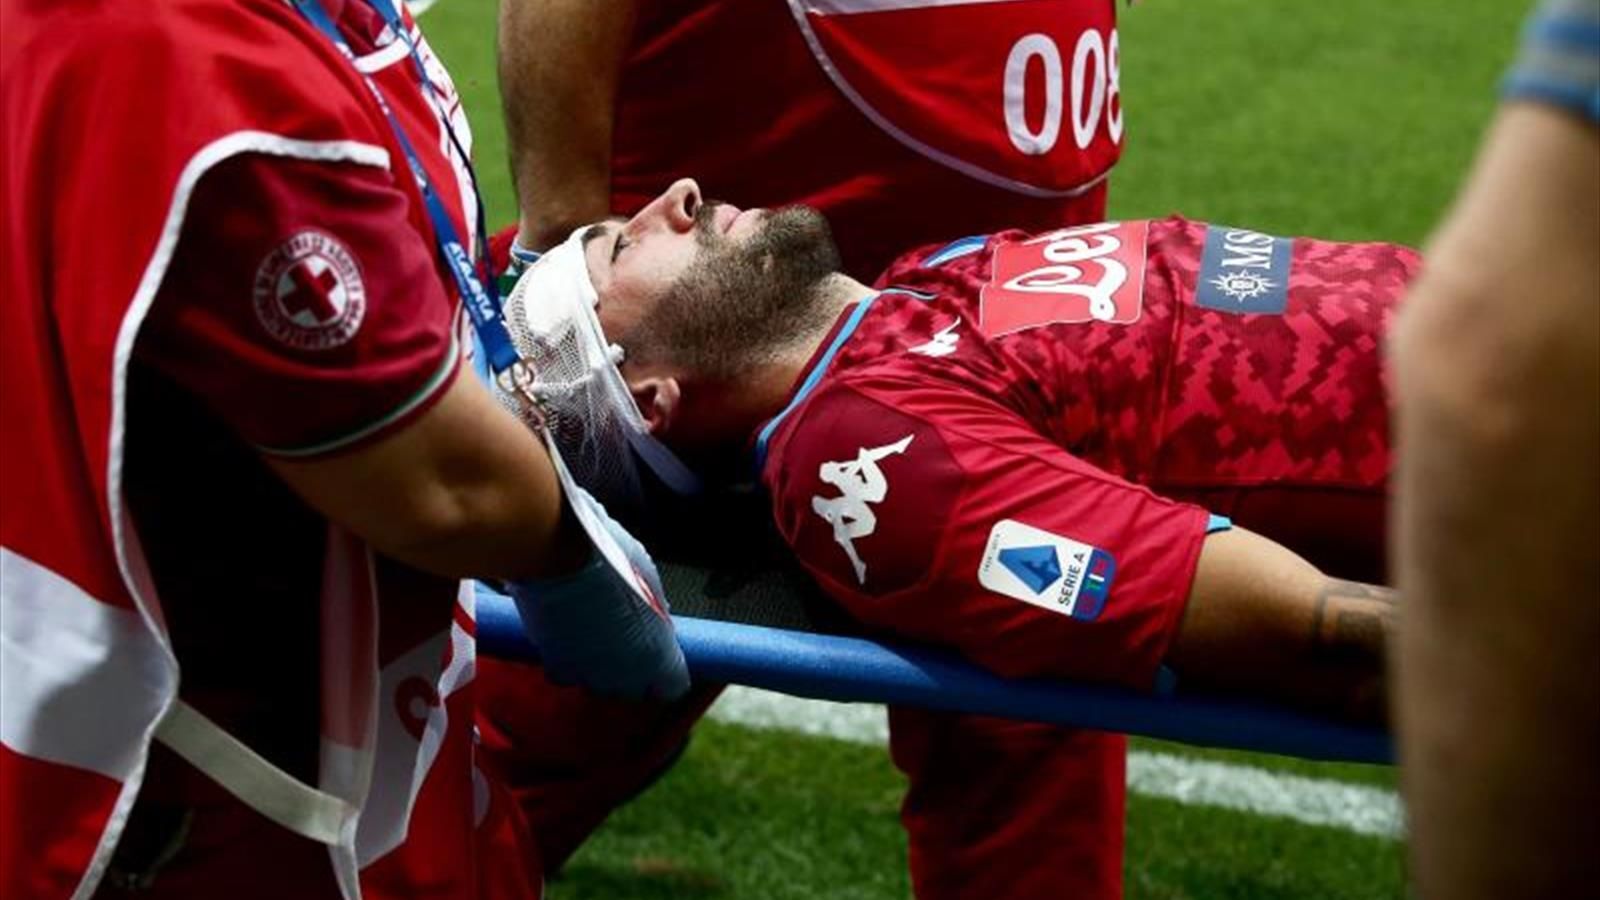 David Ospina was left with a deep cut after a collision between two teammates on Thursday night